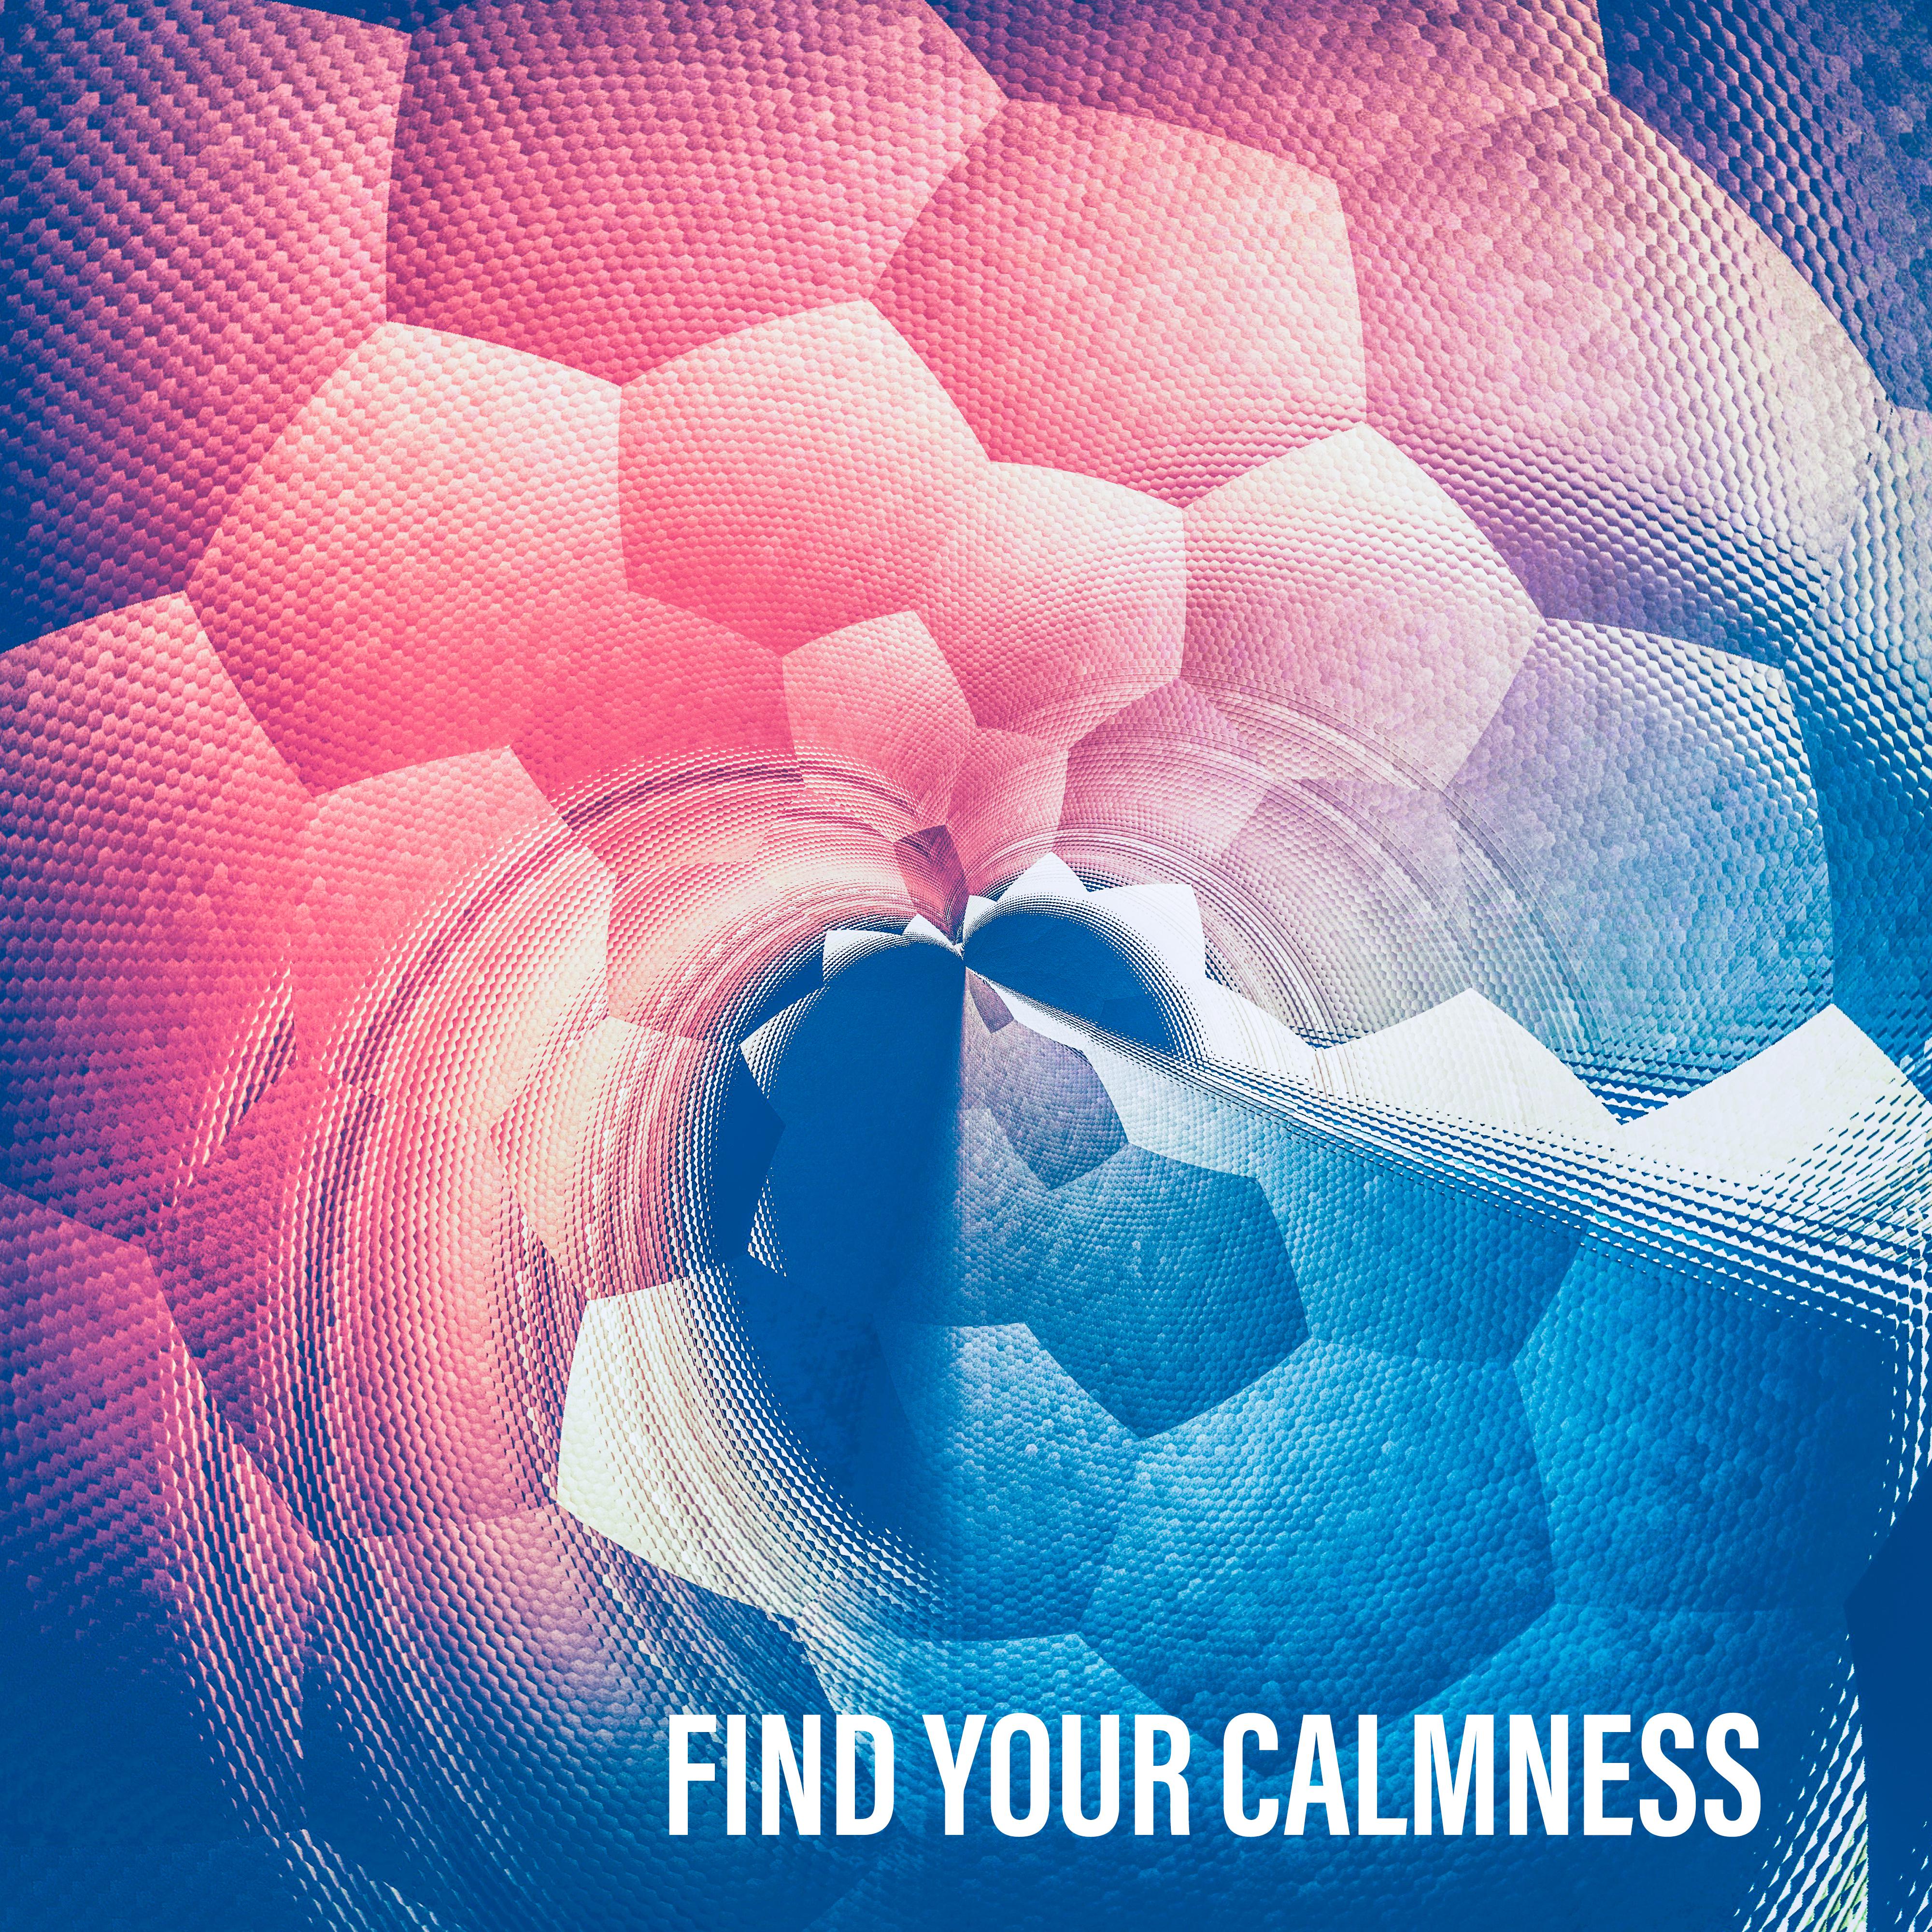 Find Your Calmness